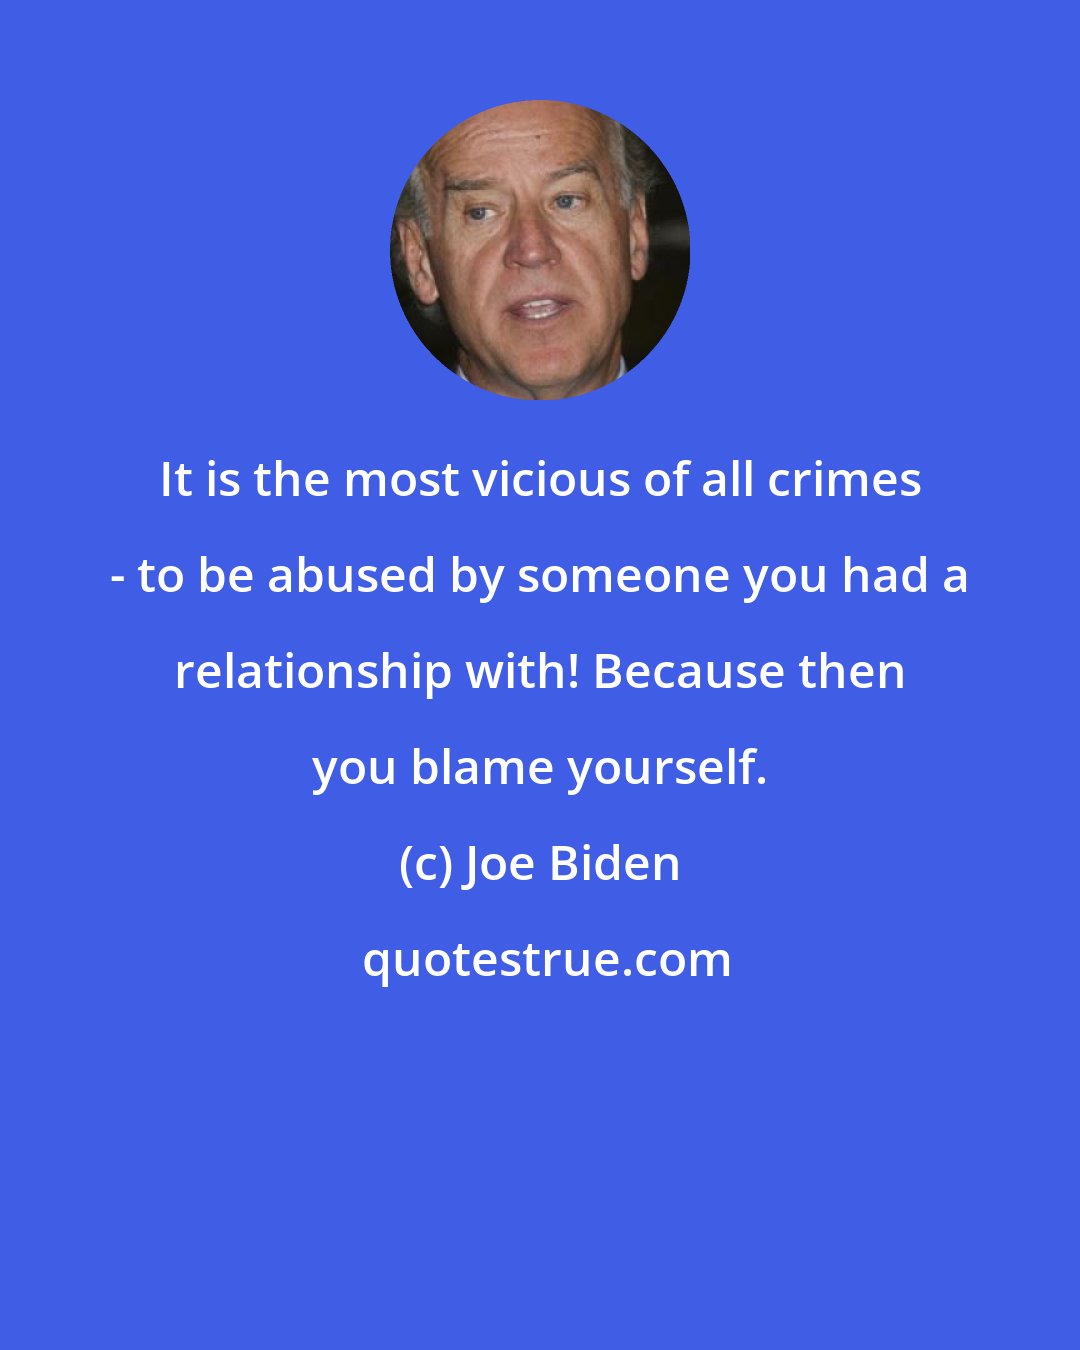 Joe Biden: It is the most vicious of all crimes - to be abused by someone you had a relationship with! Because then you blame yourself.